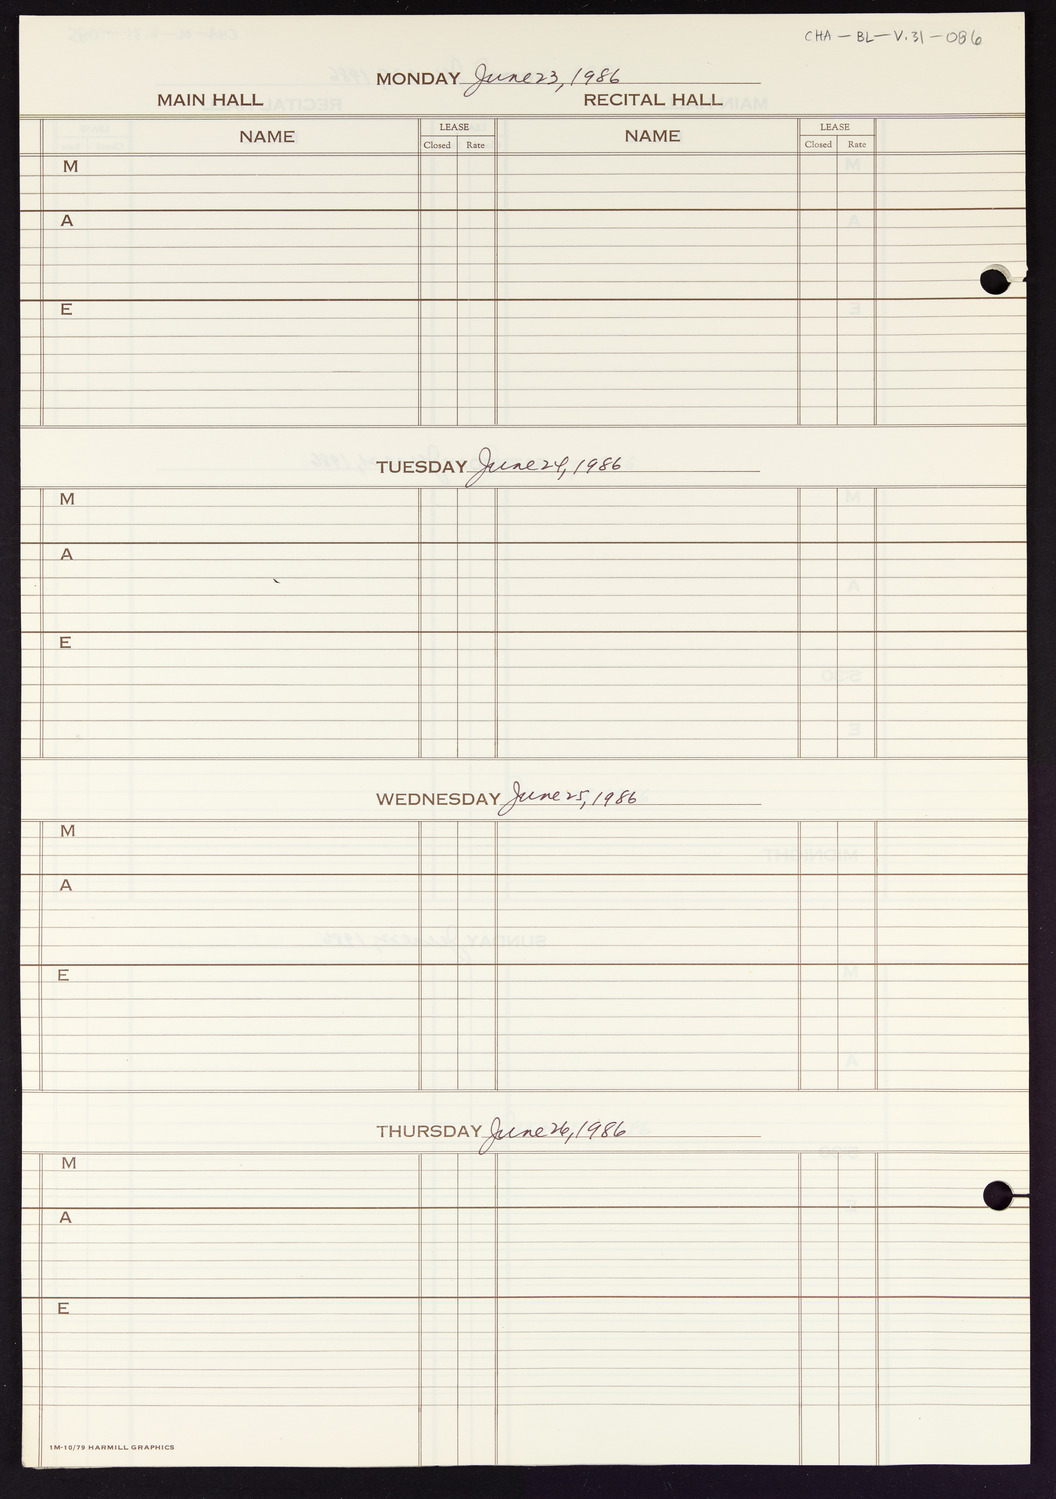 Carnegie Hall Booking Ledger, volume 31, page 86